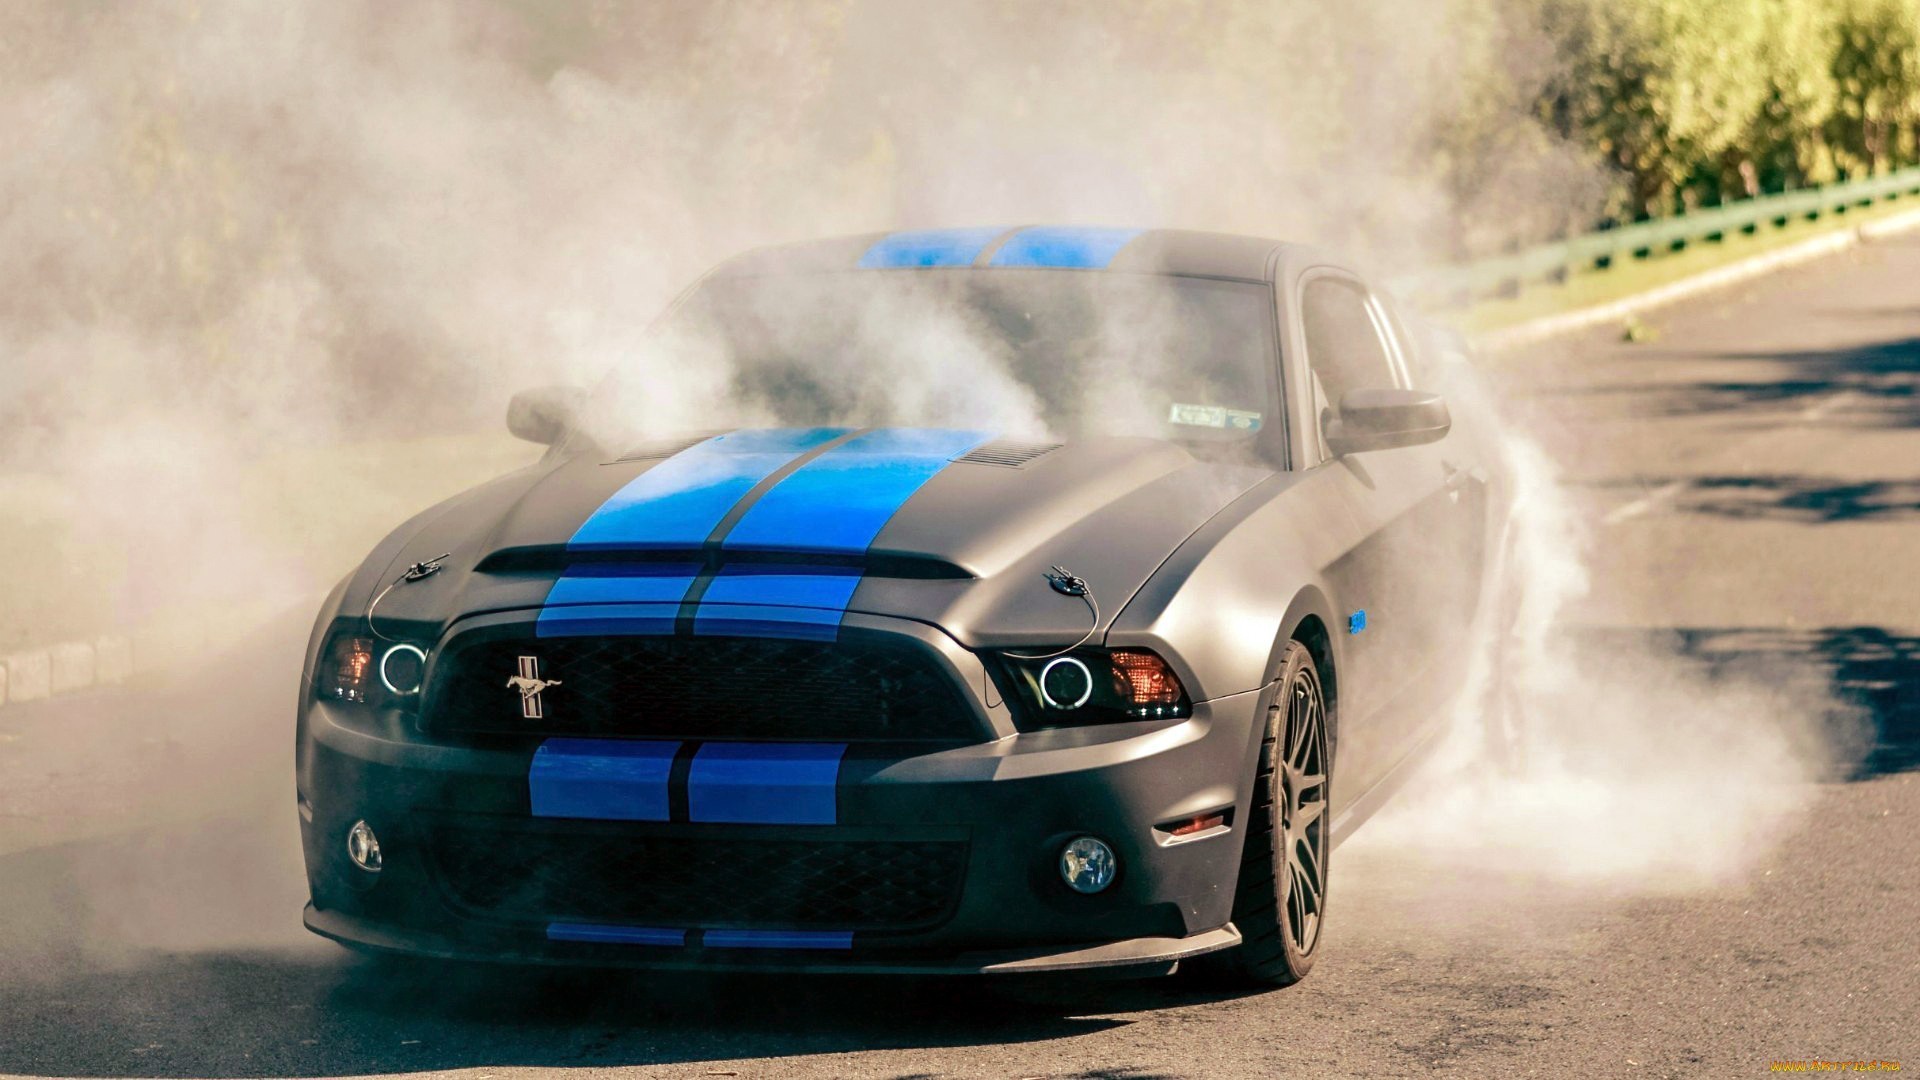 General 1920x1080 Ford Mustang Ford car vehicle black cars racing stripes smoke Ford Mustang S-197 II muscle cars American cars